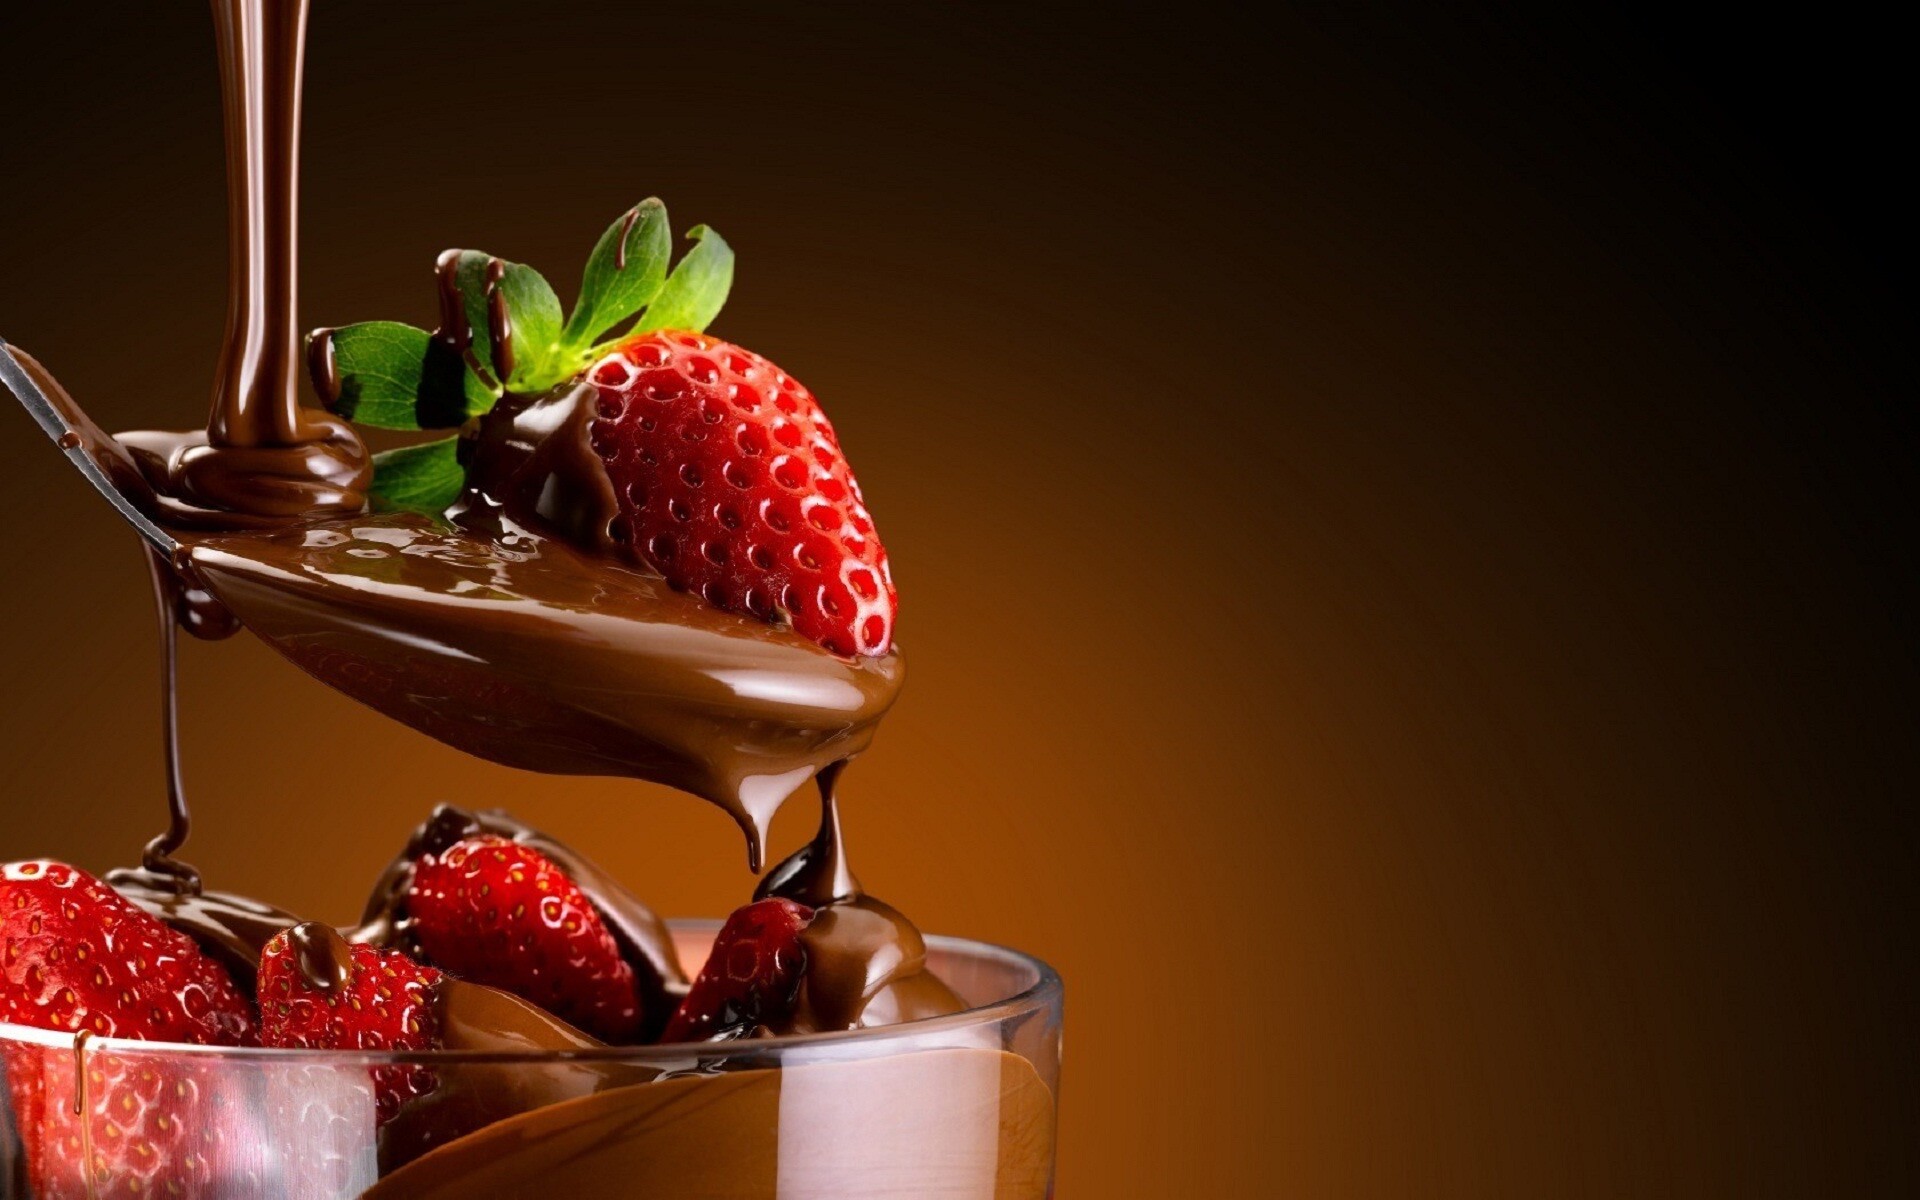 HD sweet wallpapers, Captivating sugar-coated goodness, Tempting sweetness, Flavorful delight, 1920x1200 HD Desktop